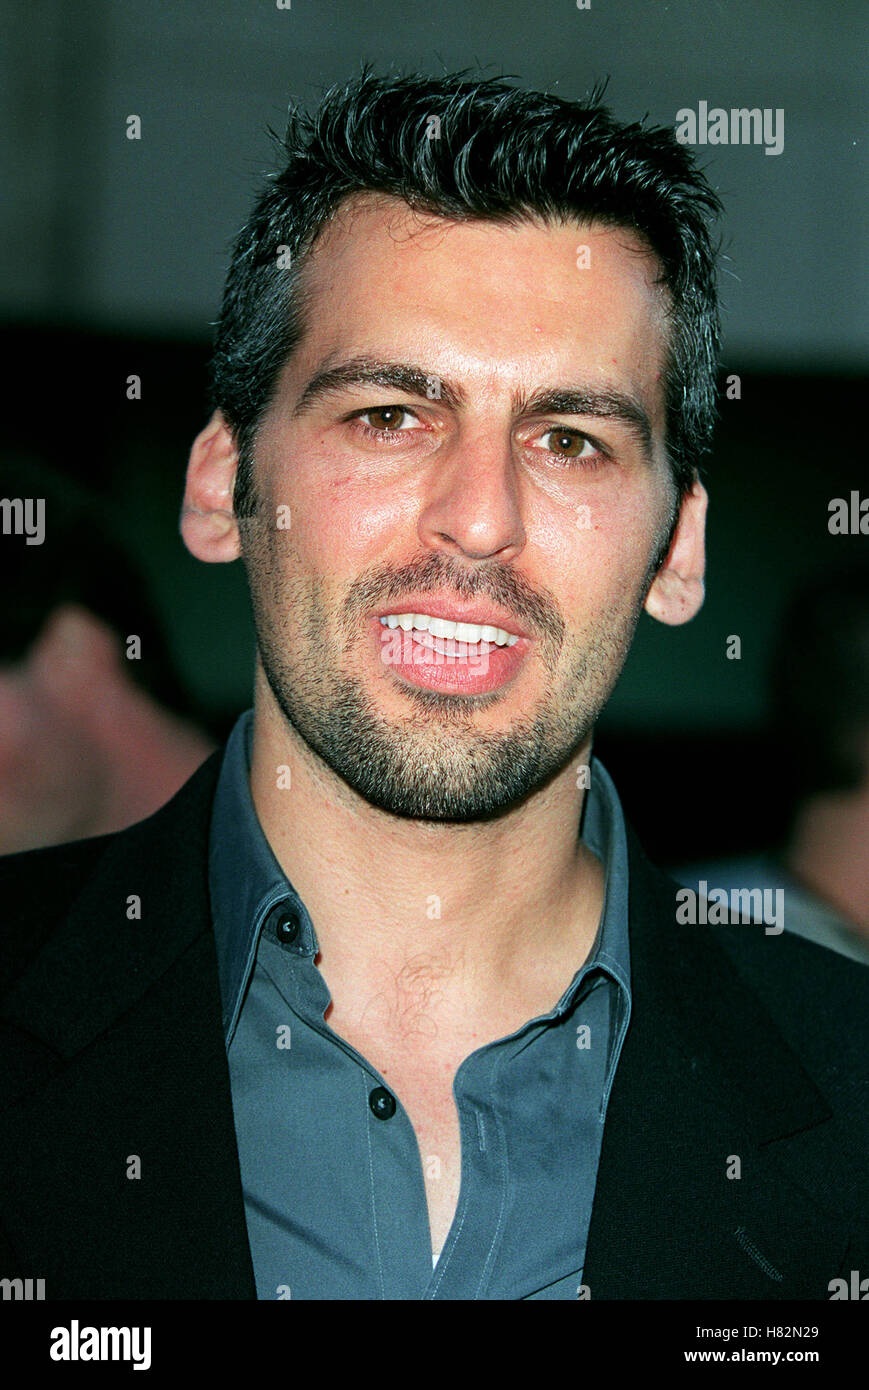 ODED FEHR MOULIN ROUGE LOS ANGELES PREMIERE SAMUEL GOLDWYN THEATER LOS  ANGELES USA 16 May 2001 Stock Photo - Alamy